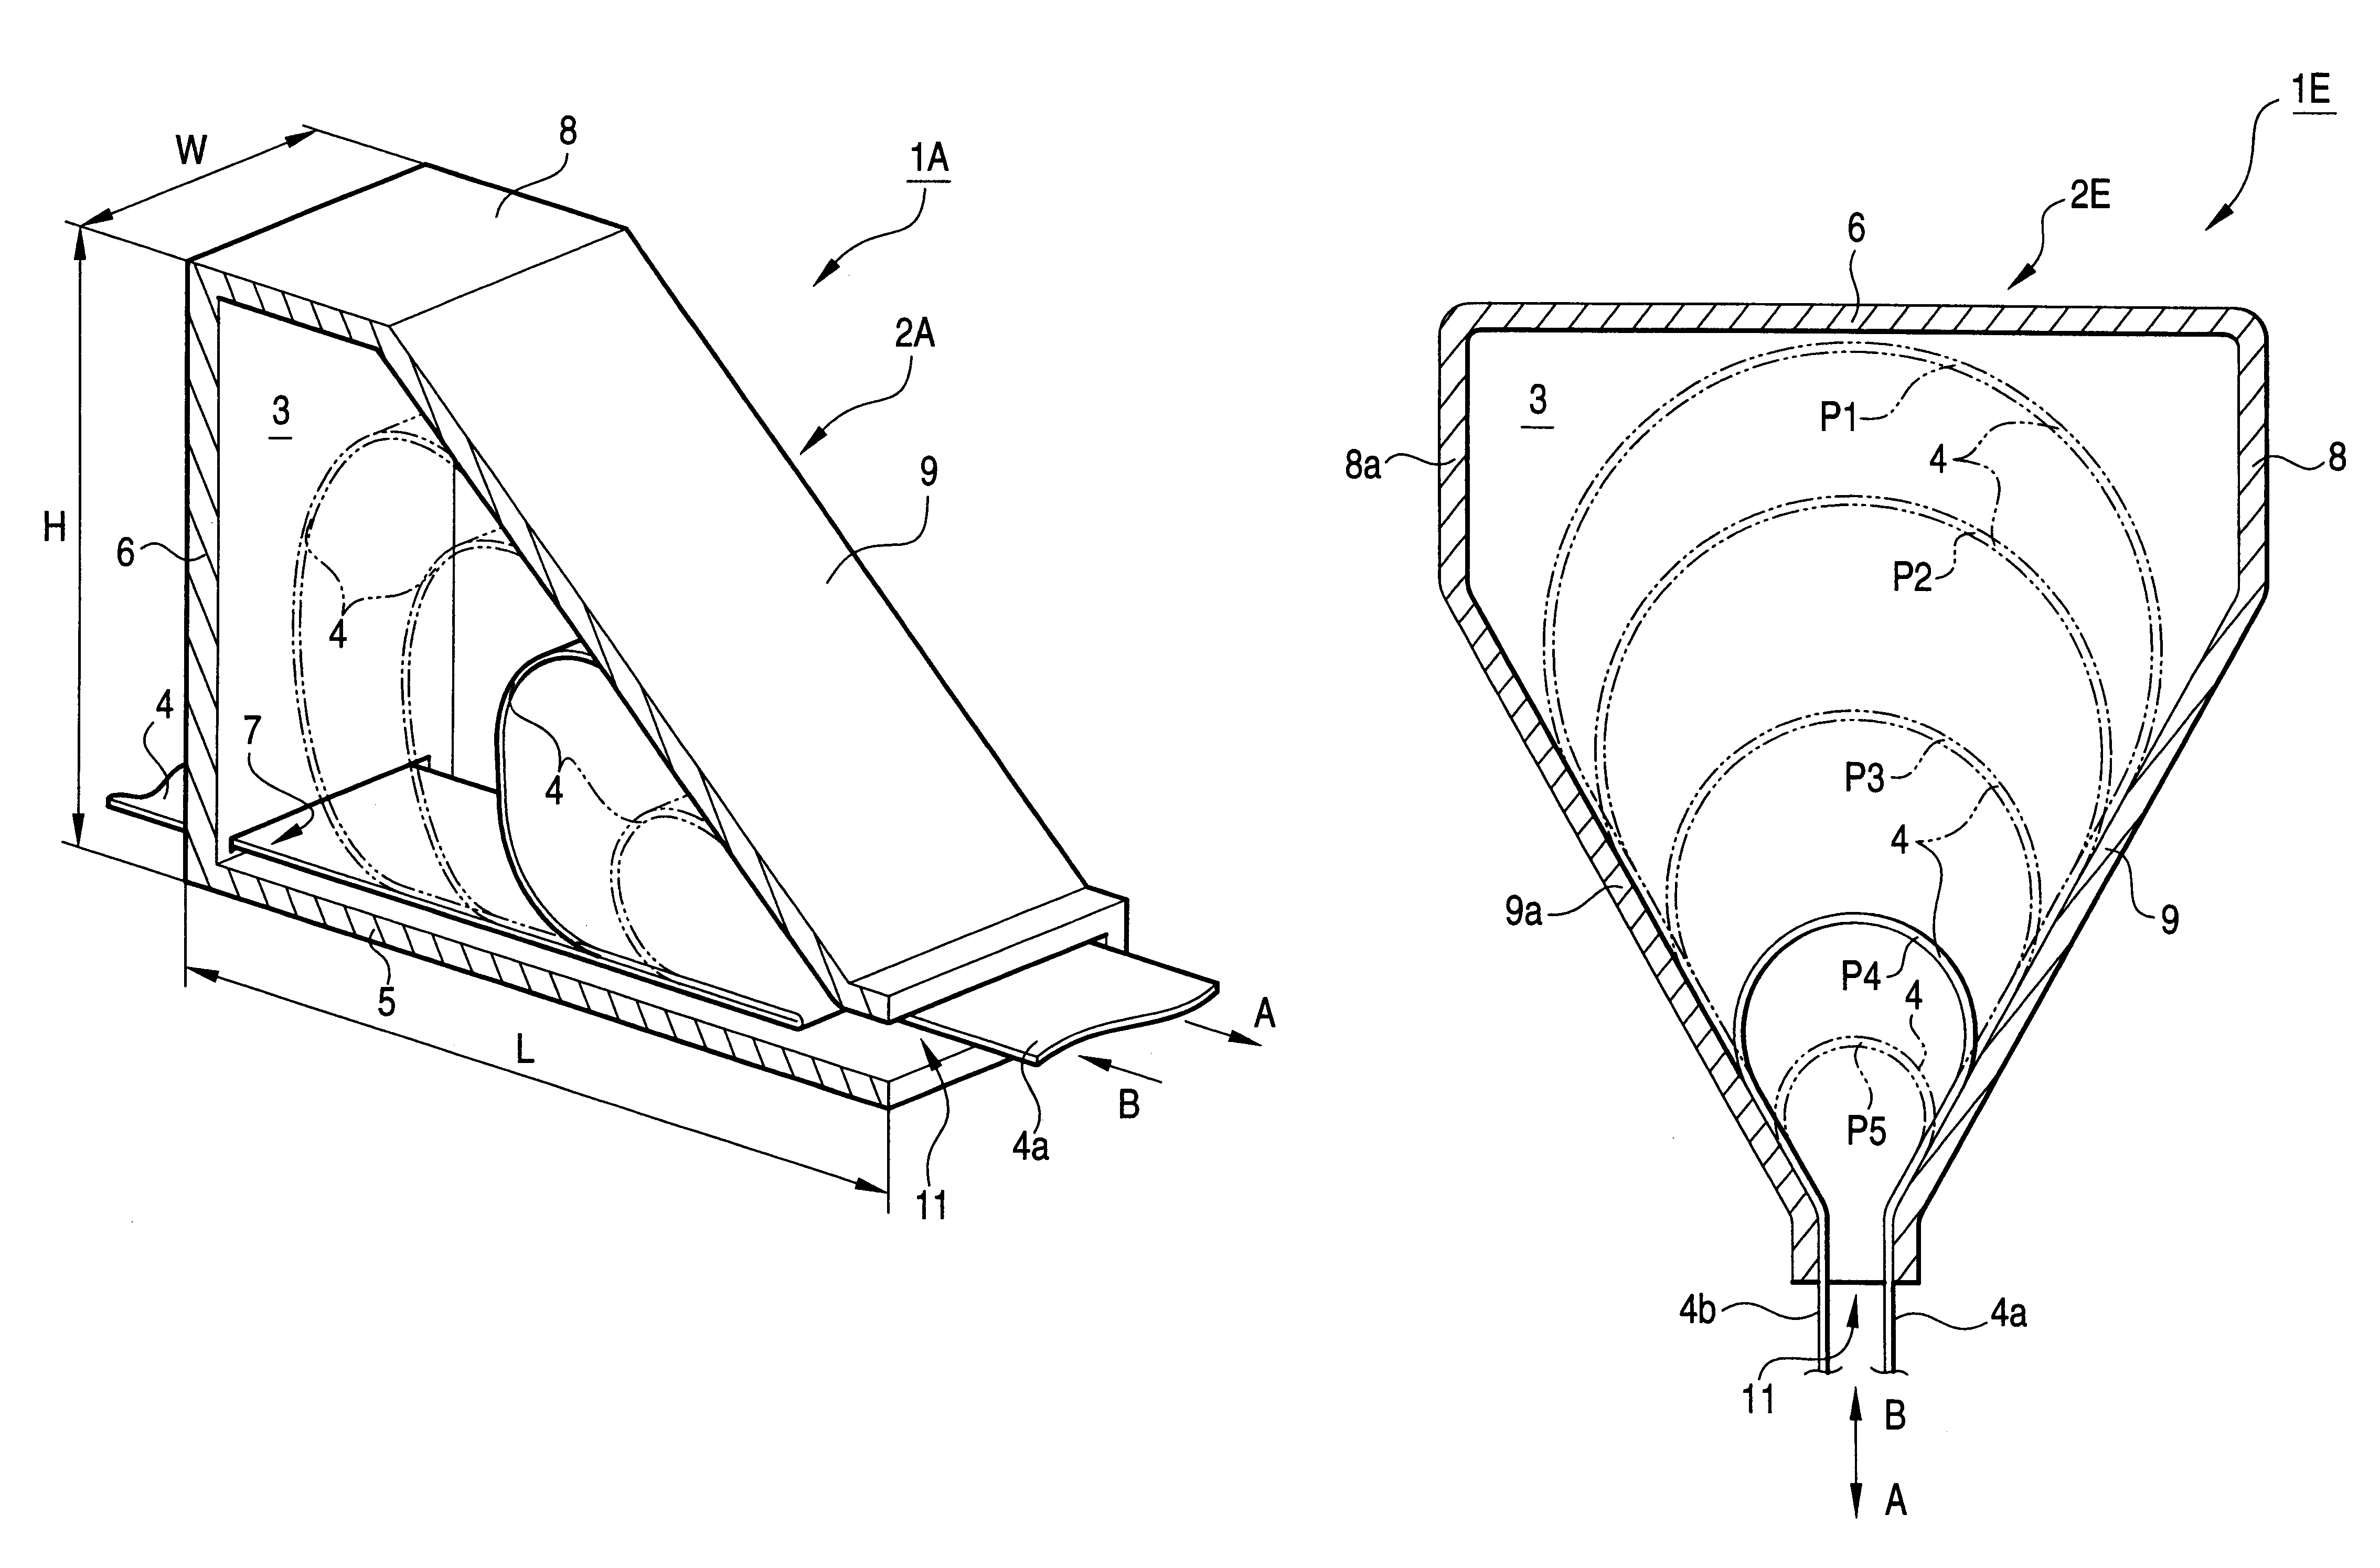 Apparatus for taking up slack of wire harness